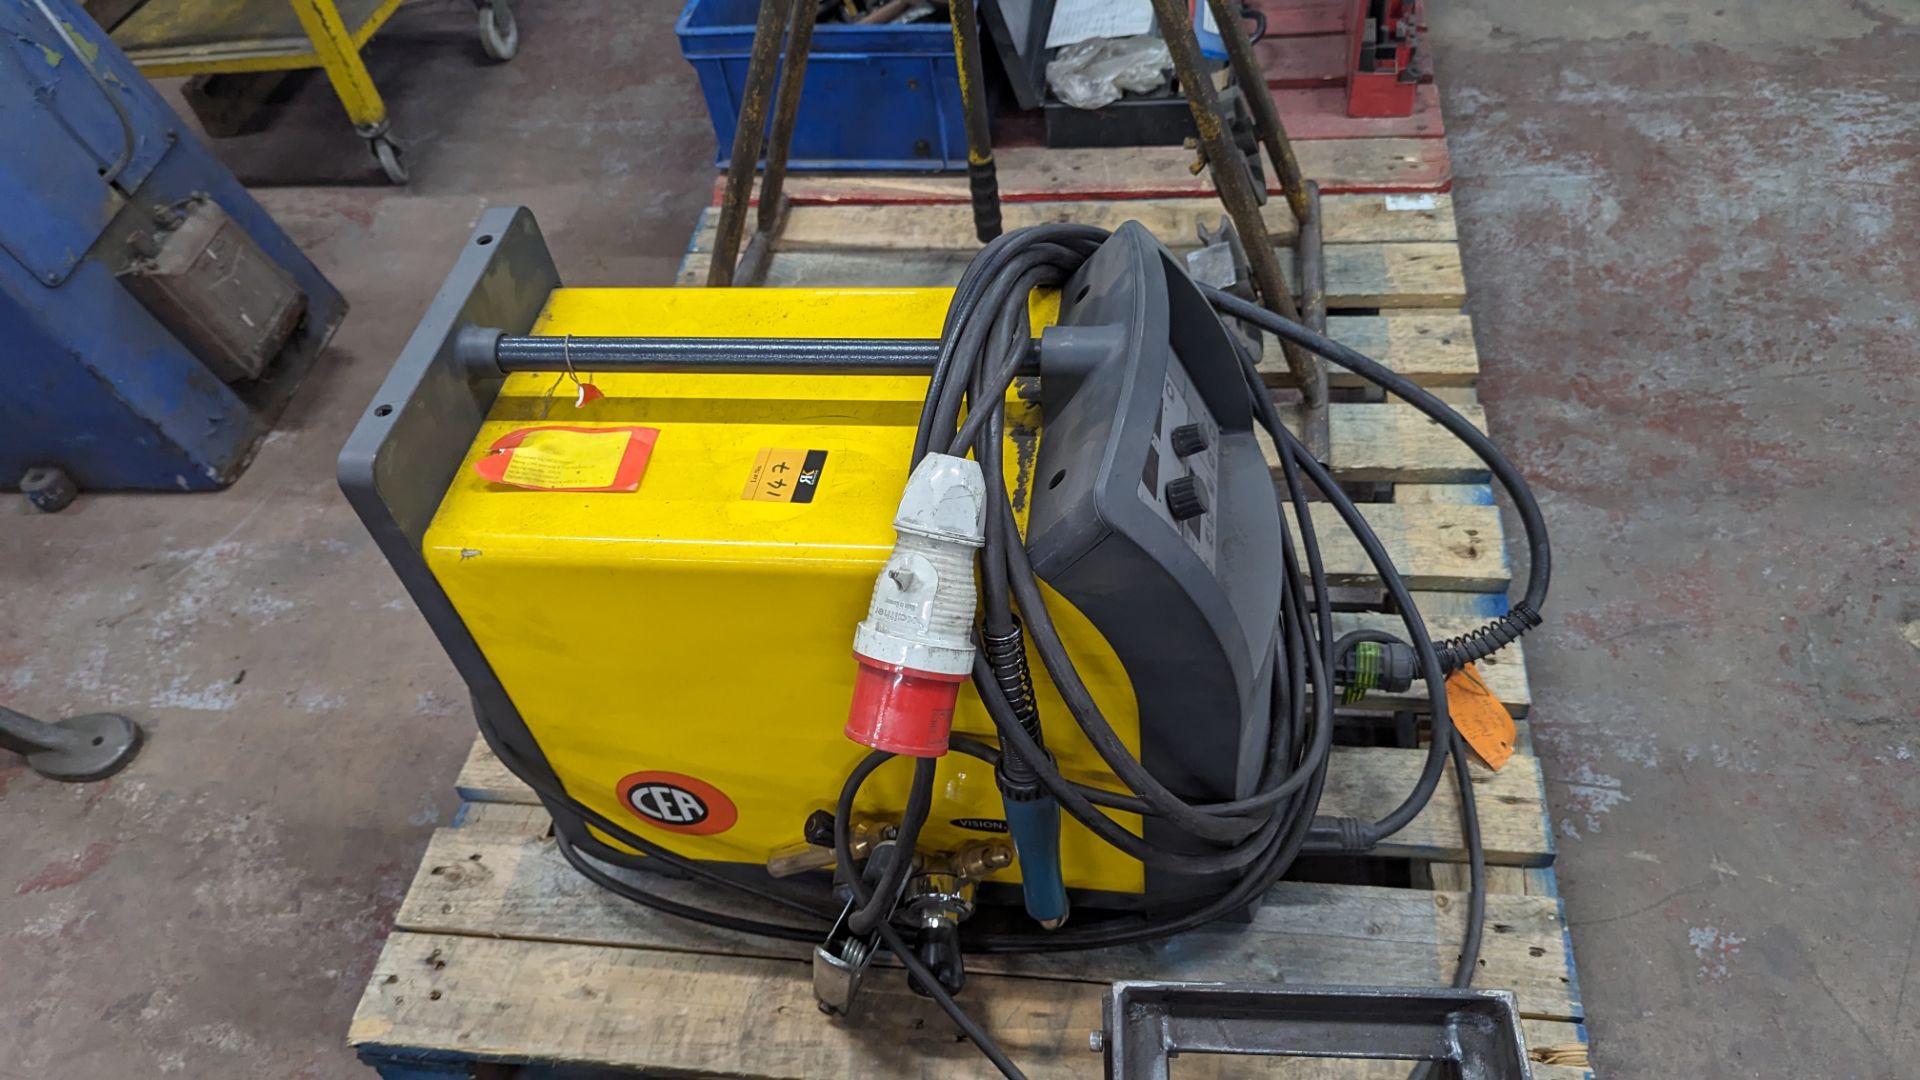 CEA Digistar 250 dual pulsed welding system - Image 6 of 11